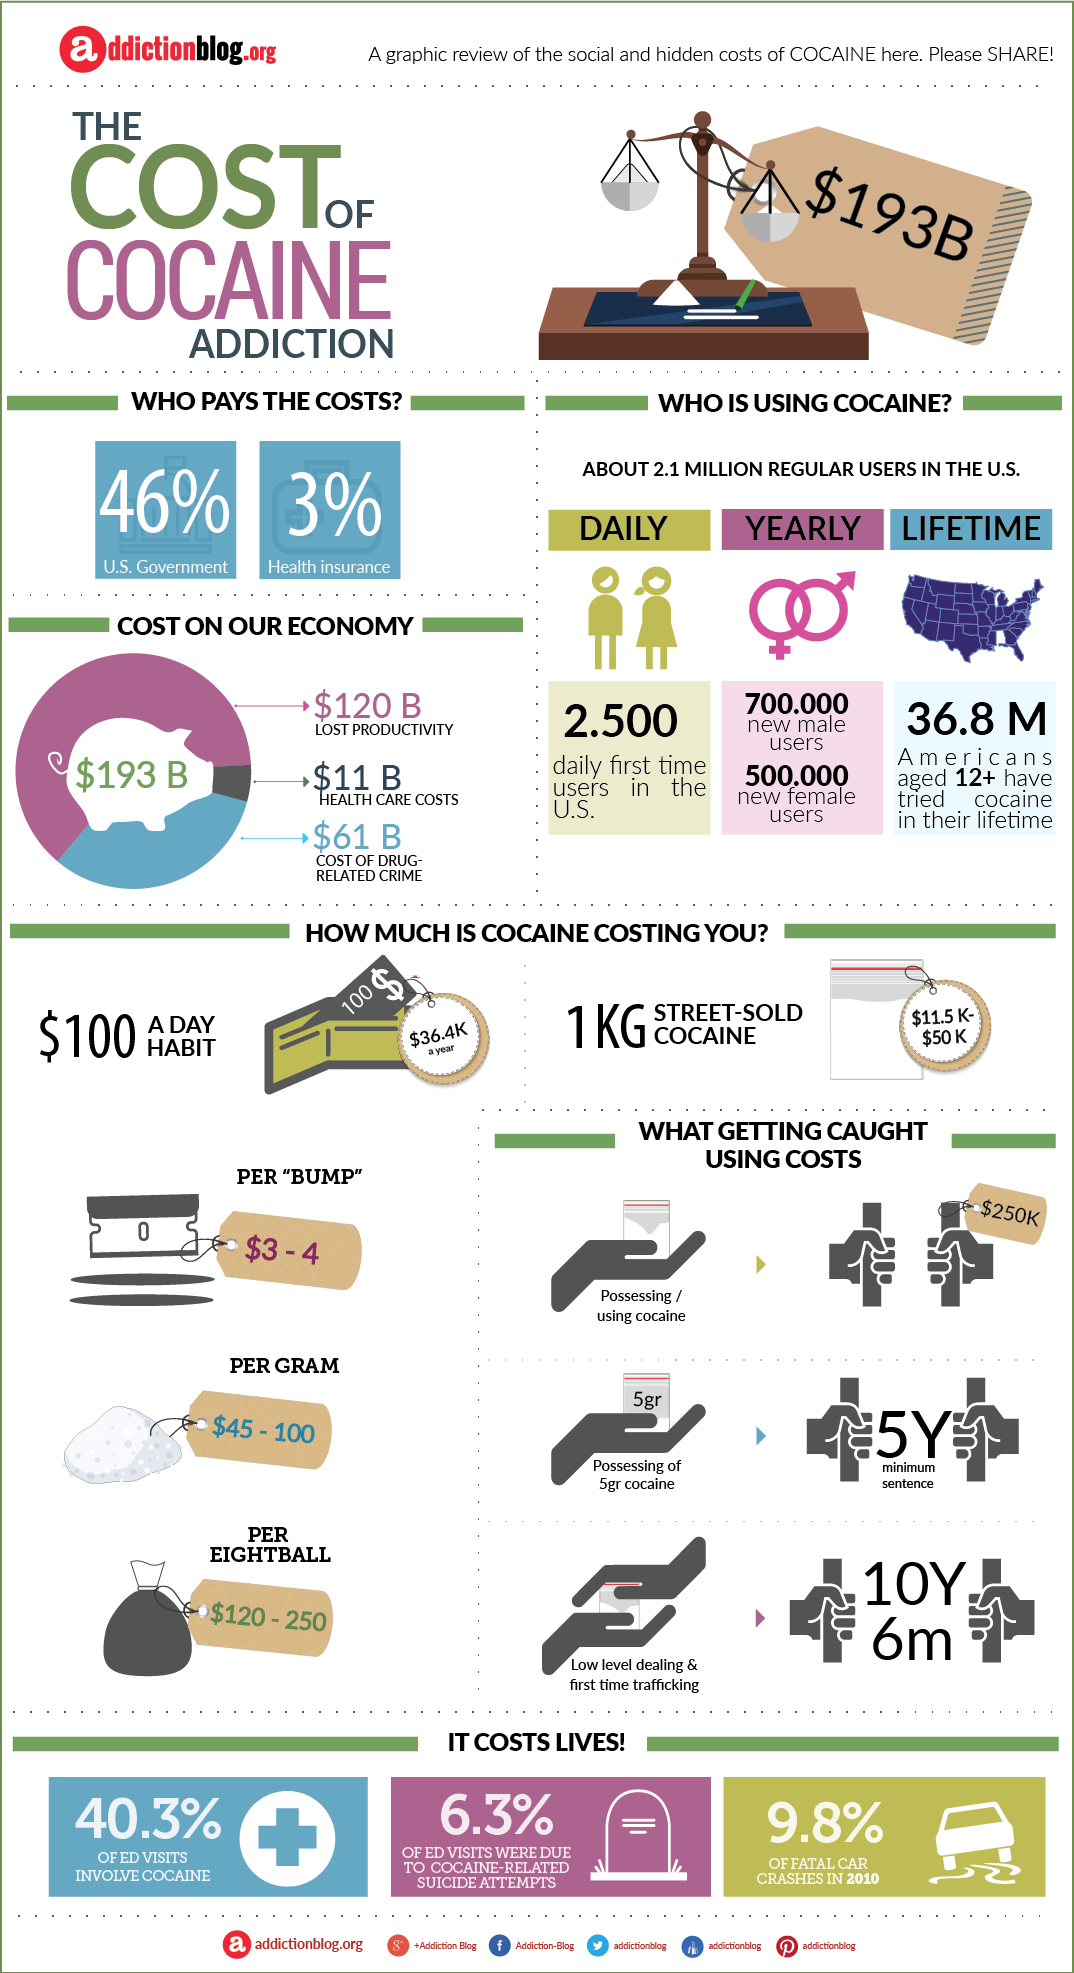 Cost of cocaine addiction (INFOGRAPHIC)